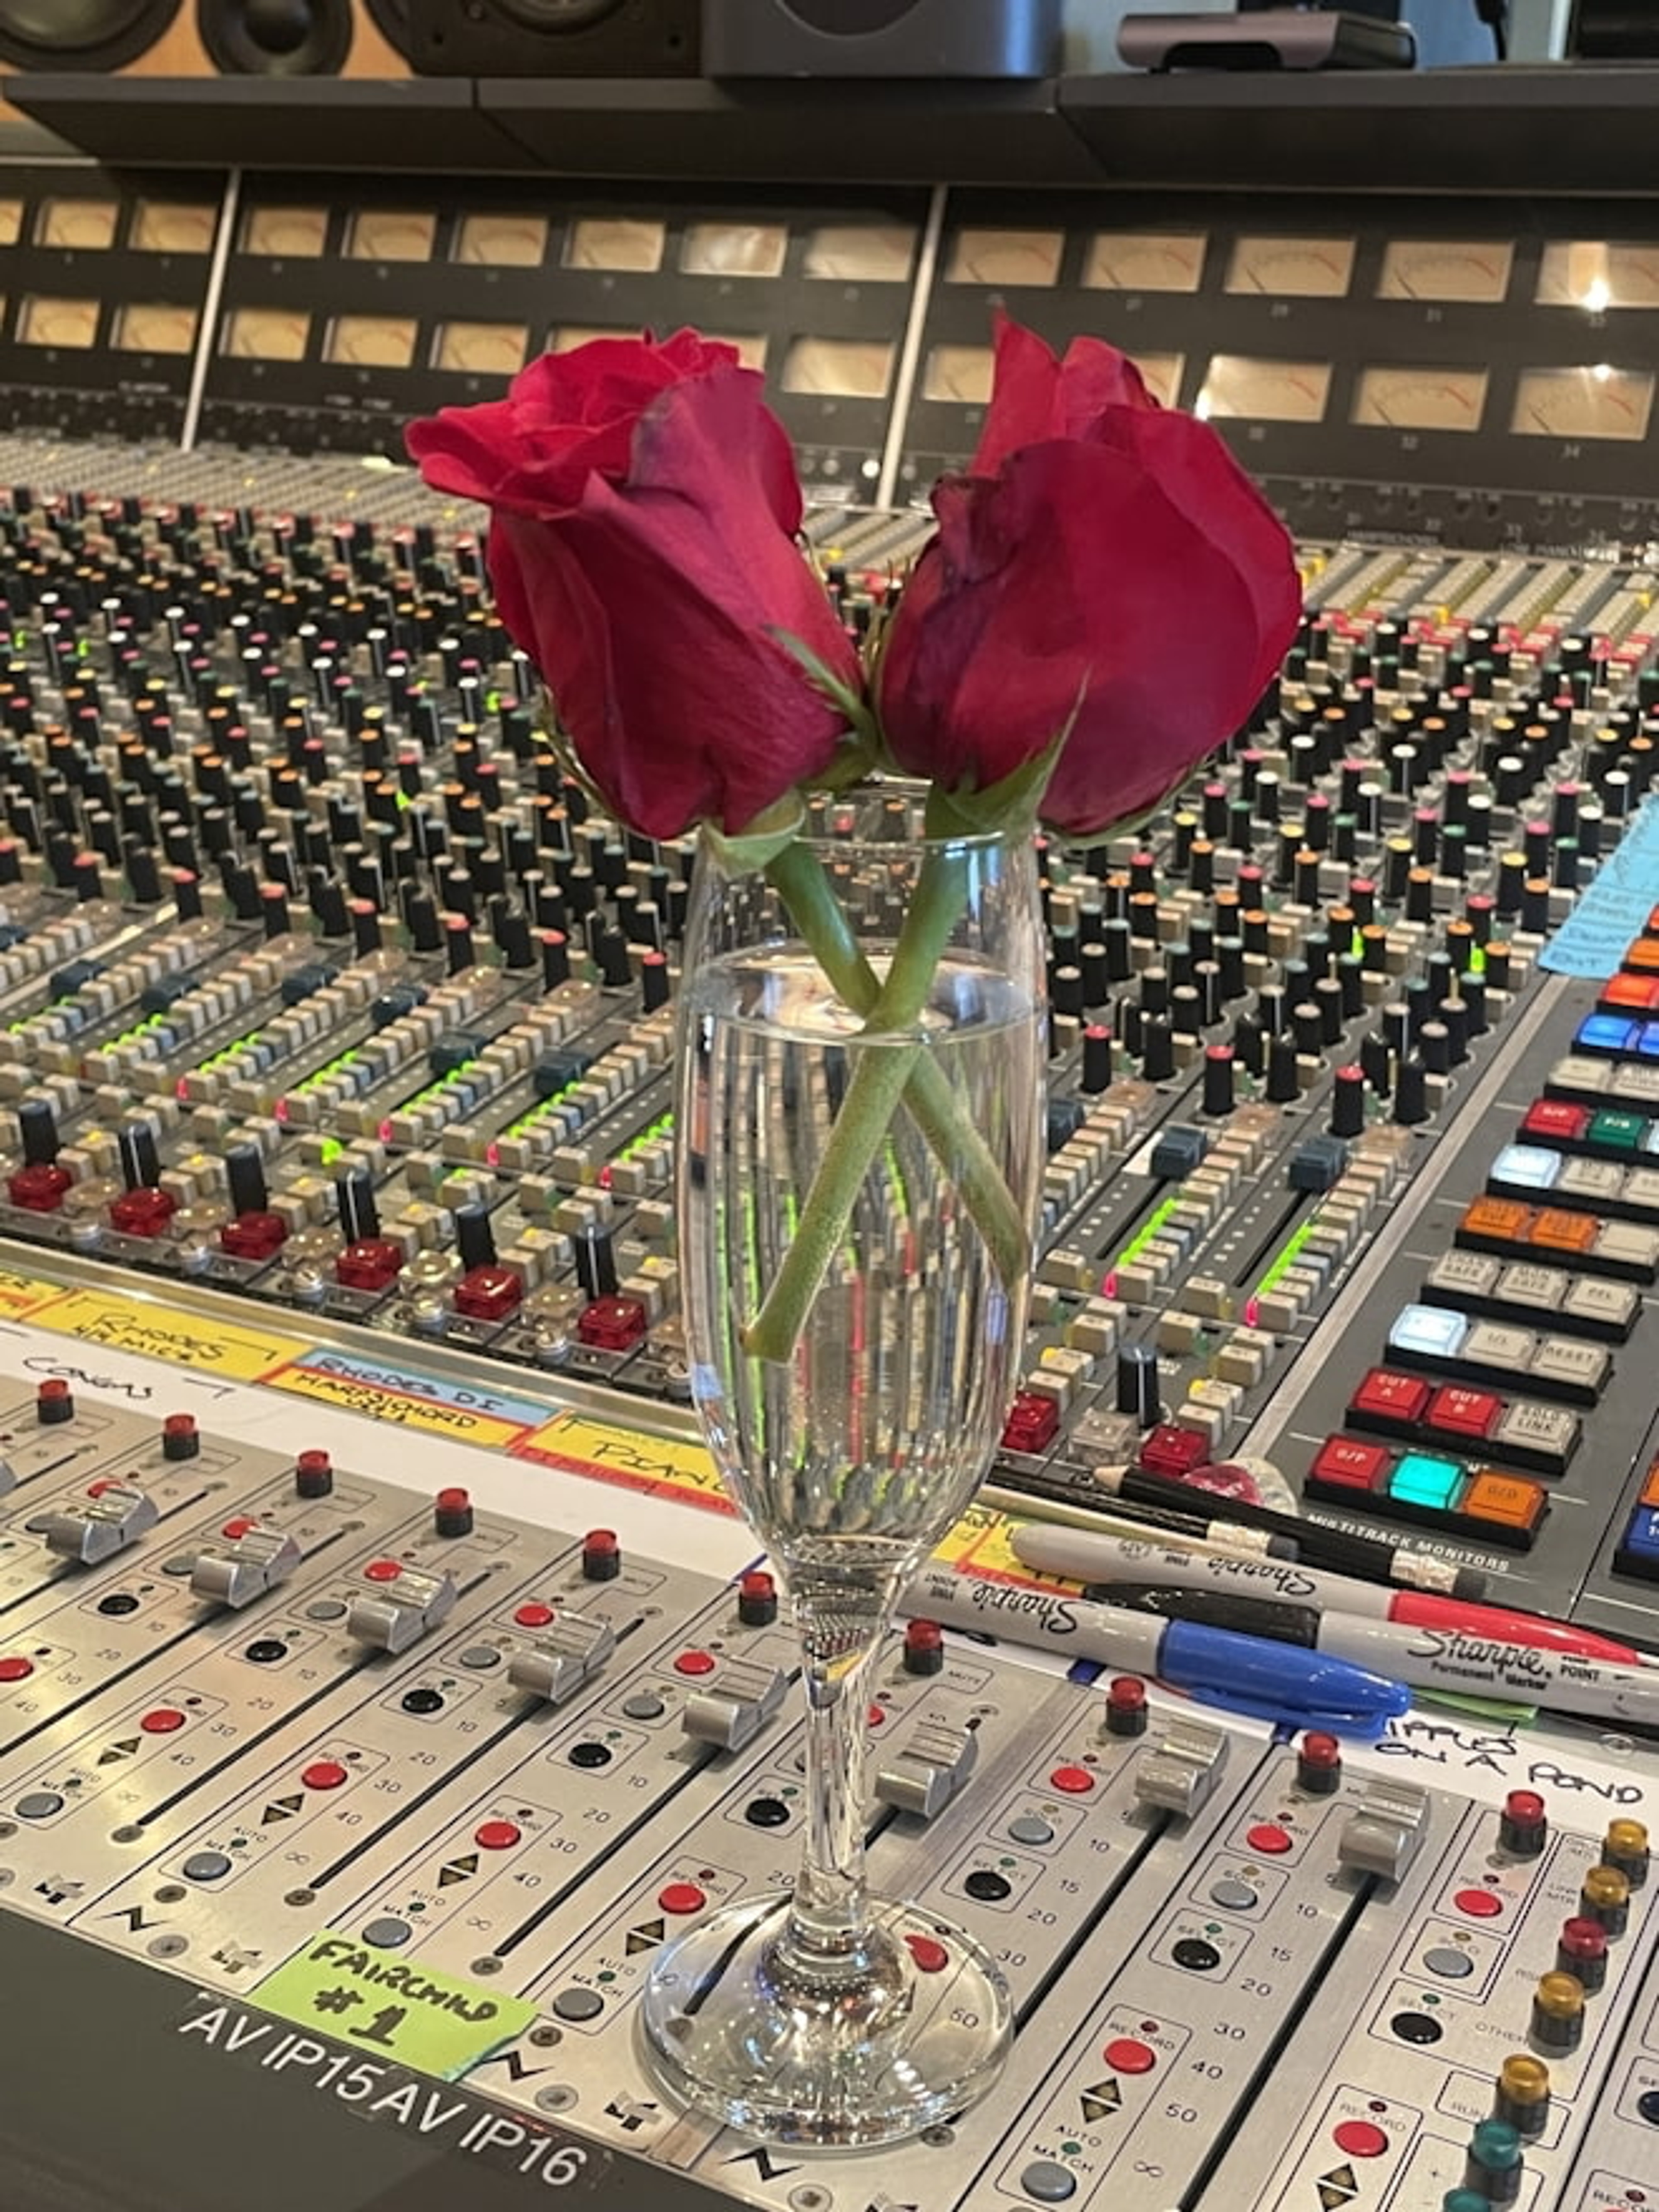 iPhone photograph of two roses in a wine glass on a music studio mixing board